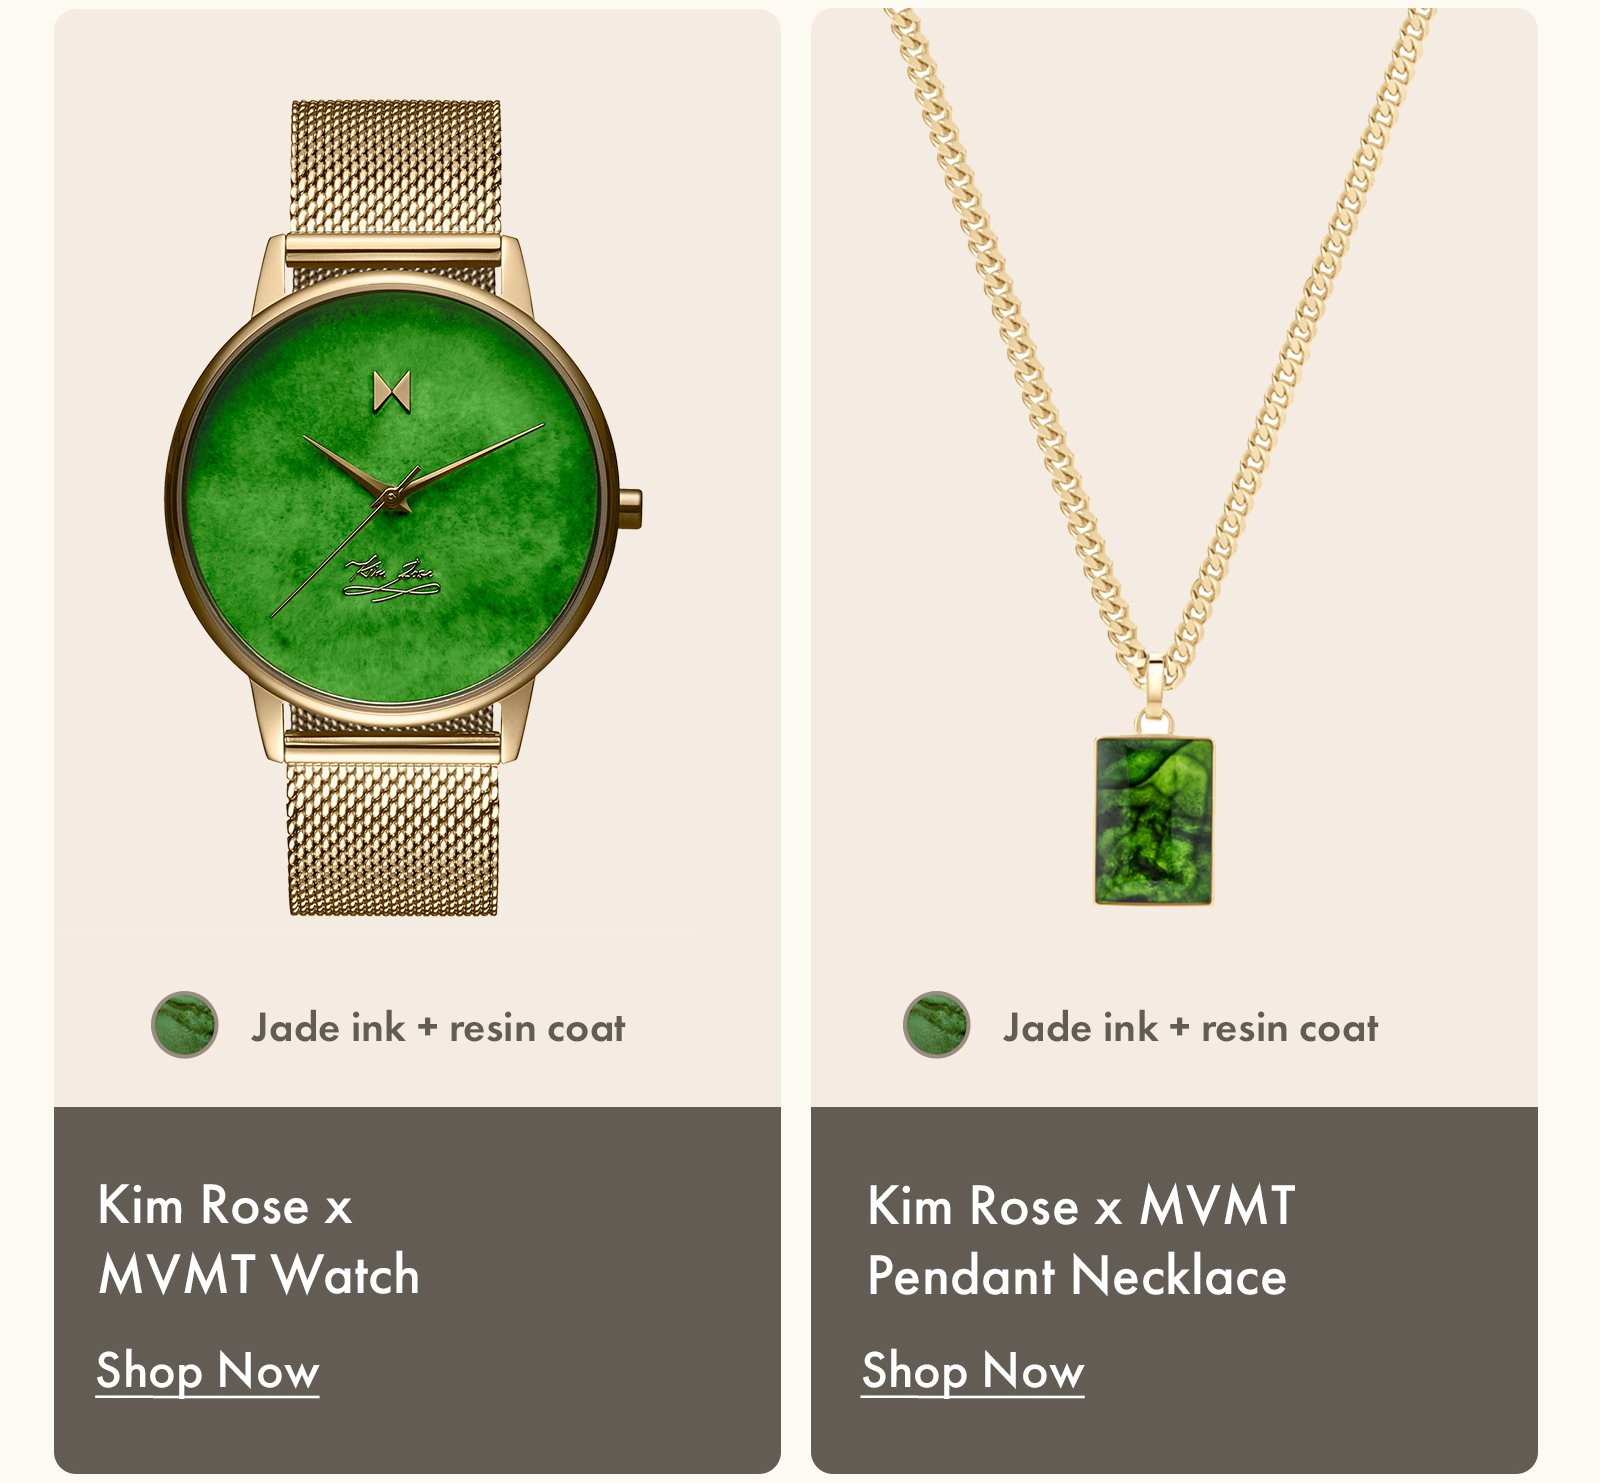 MVMT x Kim Rose watch and necklace